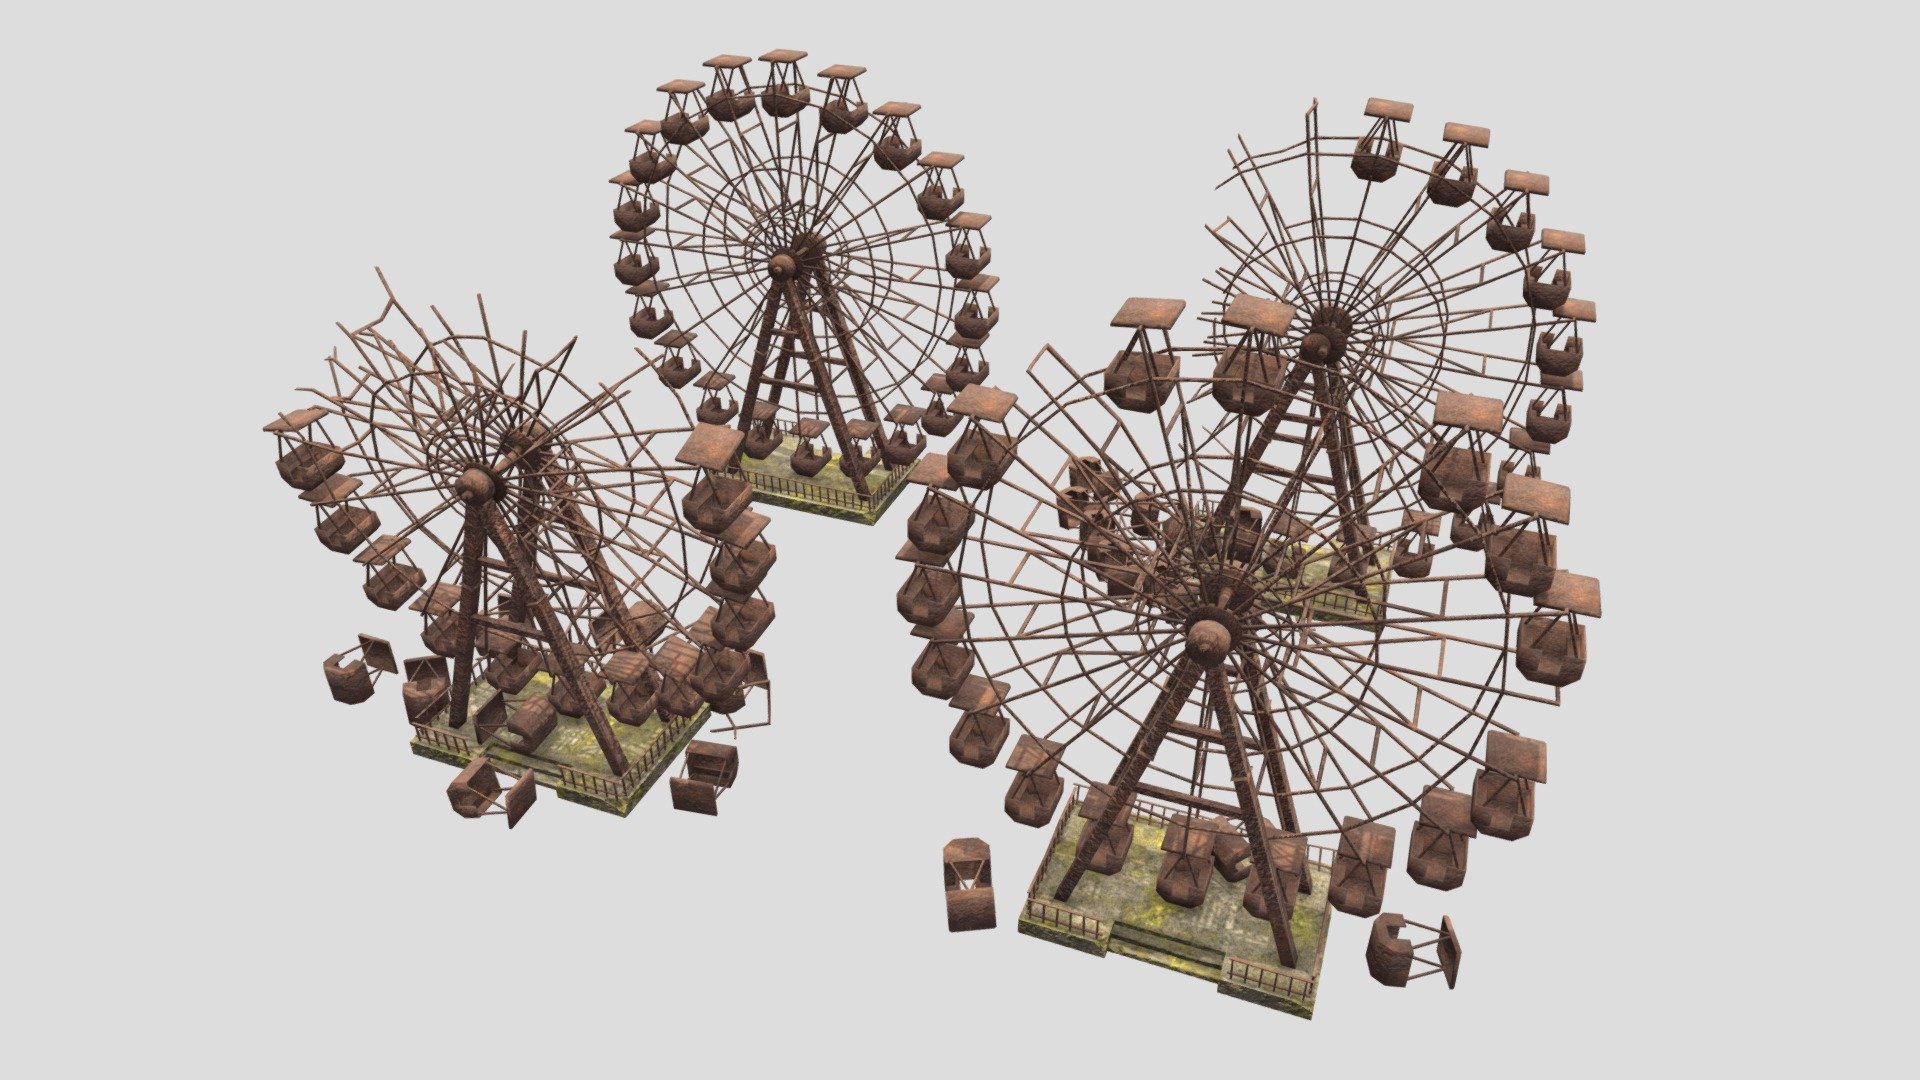 4 abandoned ferris wheels. Designed for post nuclear themes with ruined architecture. All materials and textures included. It's readily available to import in Unity3D and Ue4.


Textures png 2048x2048 (AO, Color,Heigh, Metallic, Normal, Roughness)

Included 3D formats: blend, fbx, obj, dae

1 Material

Pack Geometry Polygons 27200, Vertices 30800
 - Destroyed Ferris Wheels - 3D model by Crazy_8 (@korboleevd) 3d model